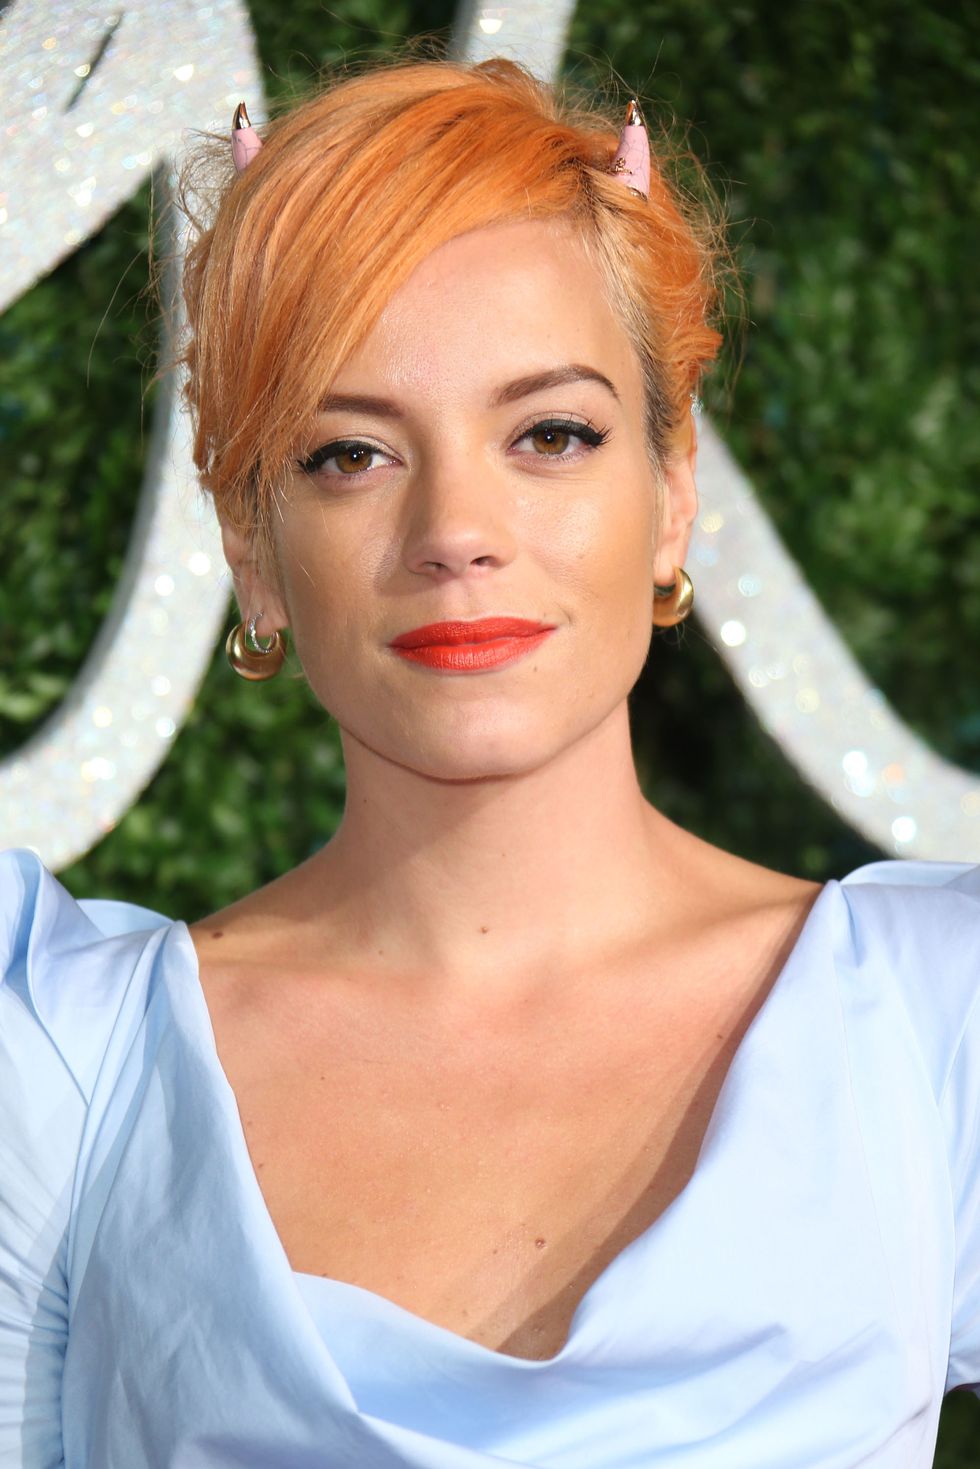 Lily Allen at BFAs 2014 - British Fashion Awards 2014: Celebrity beauty looks